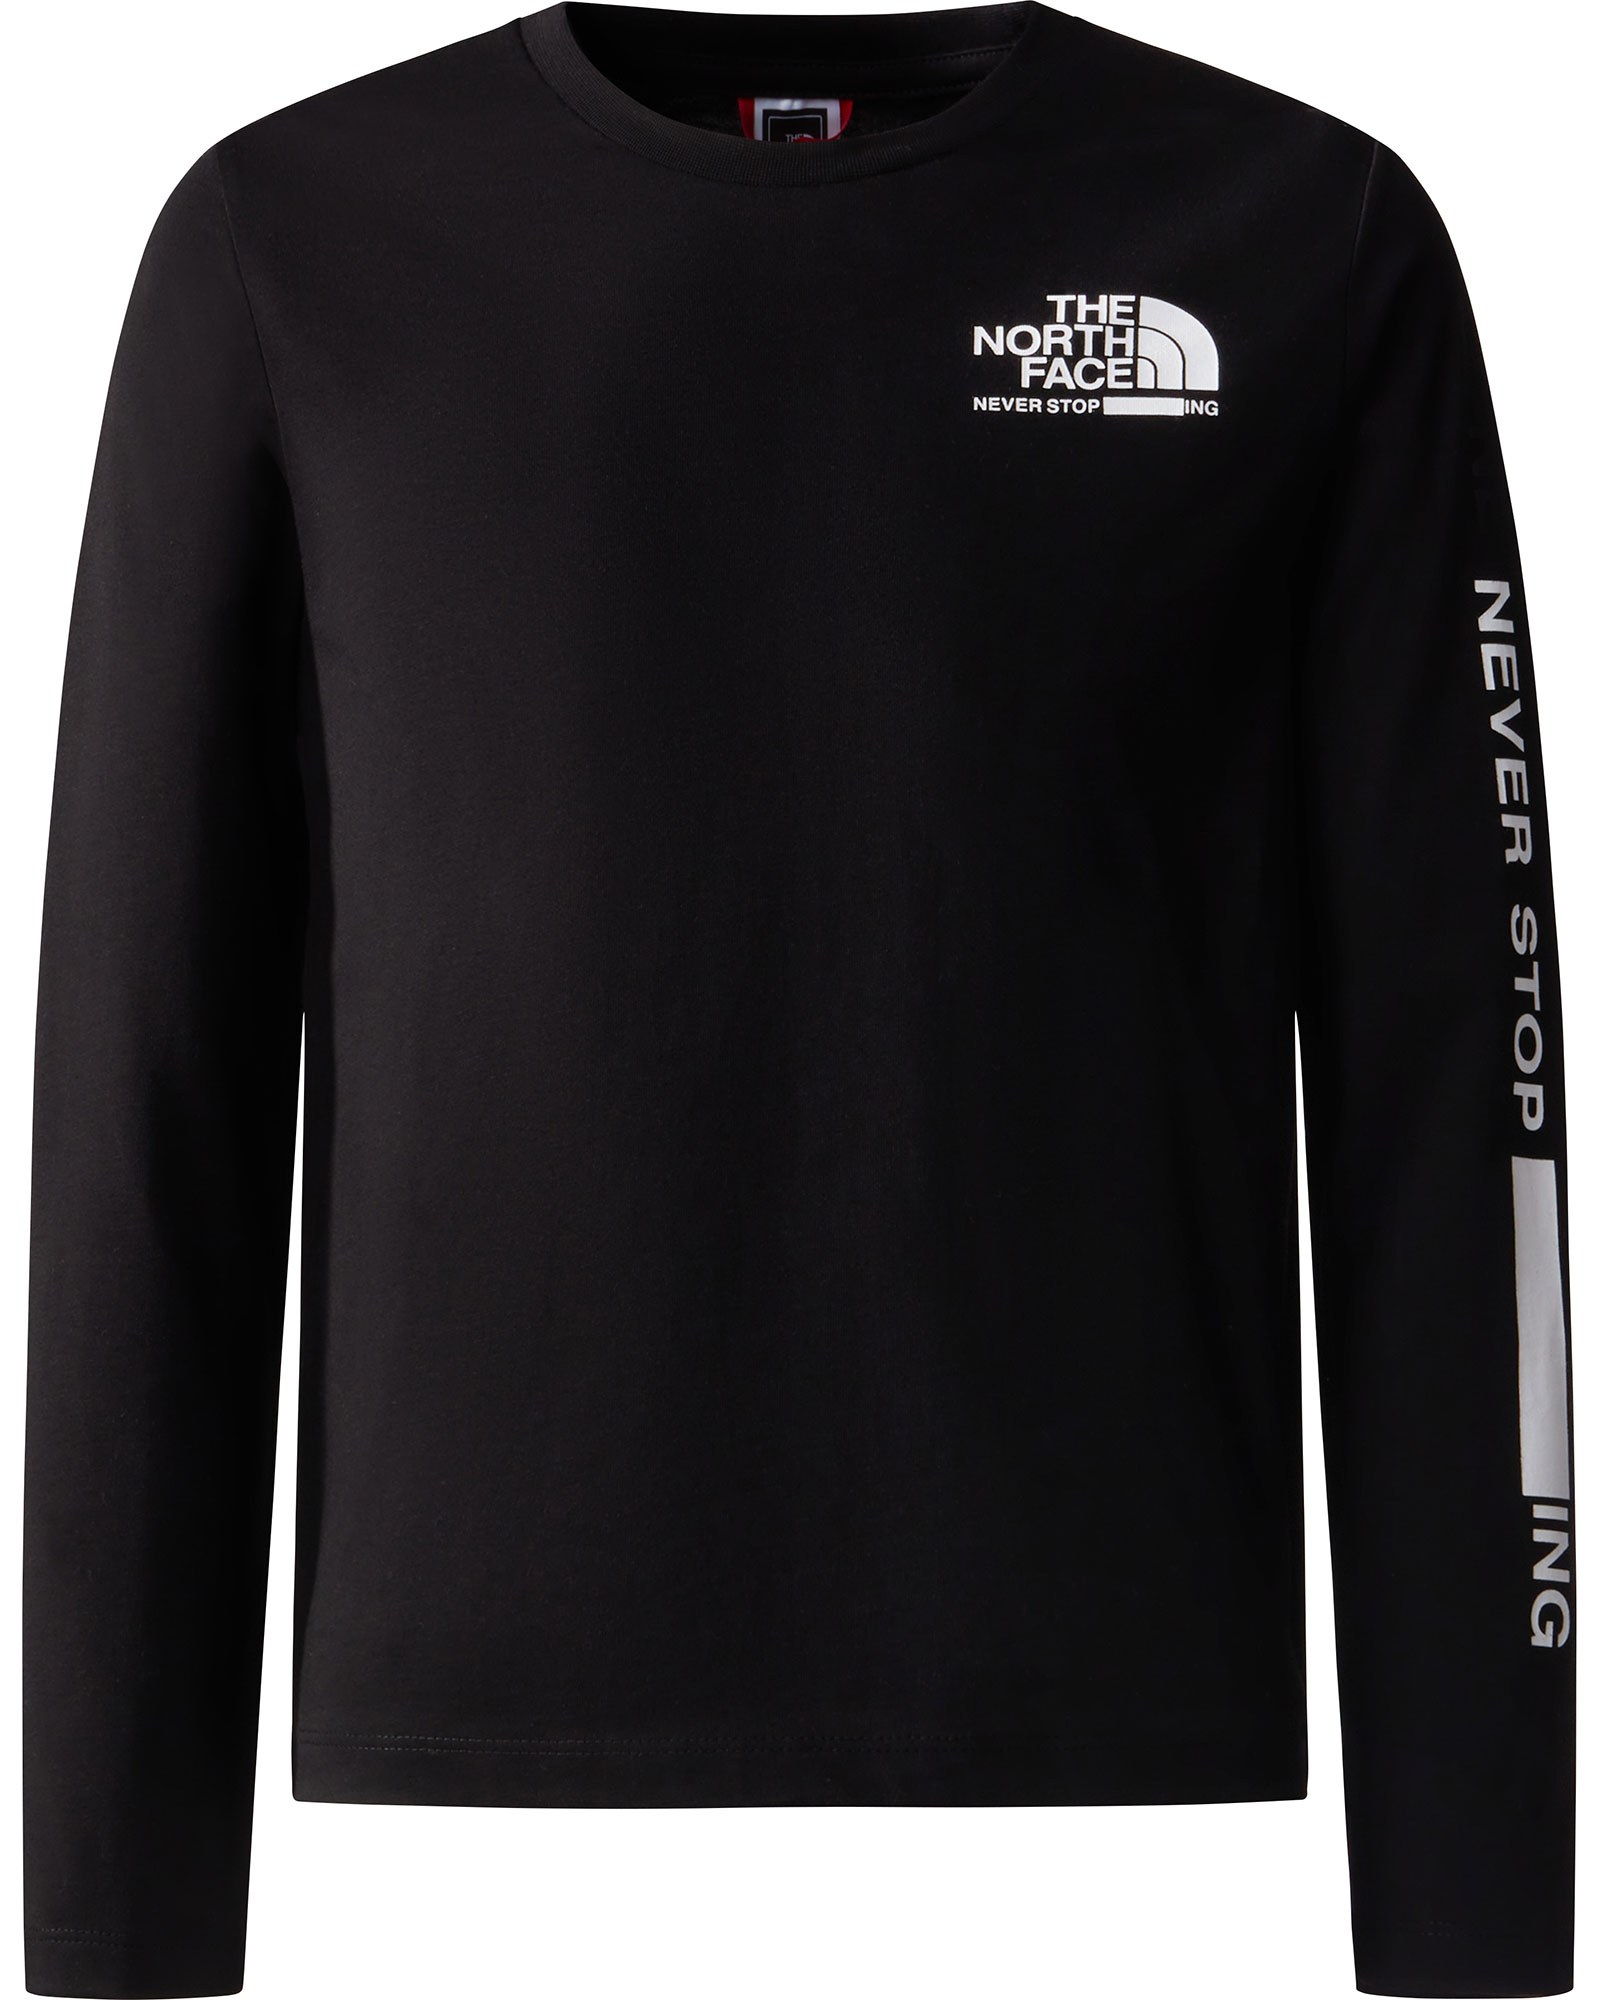 The North Face Youth Graphic Long Sleeved T Shirt 2 - TNF Black S